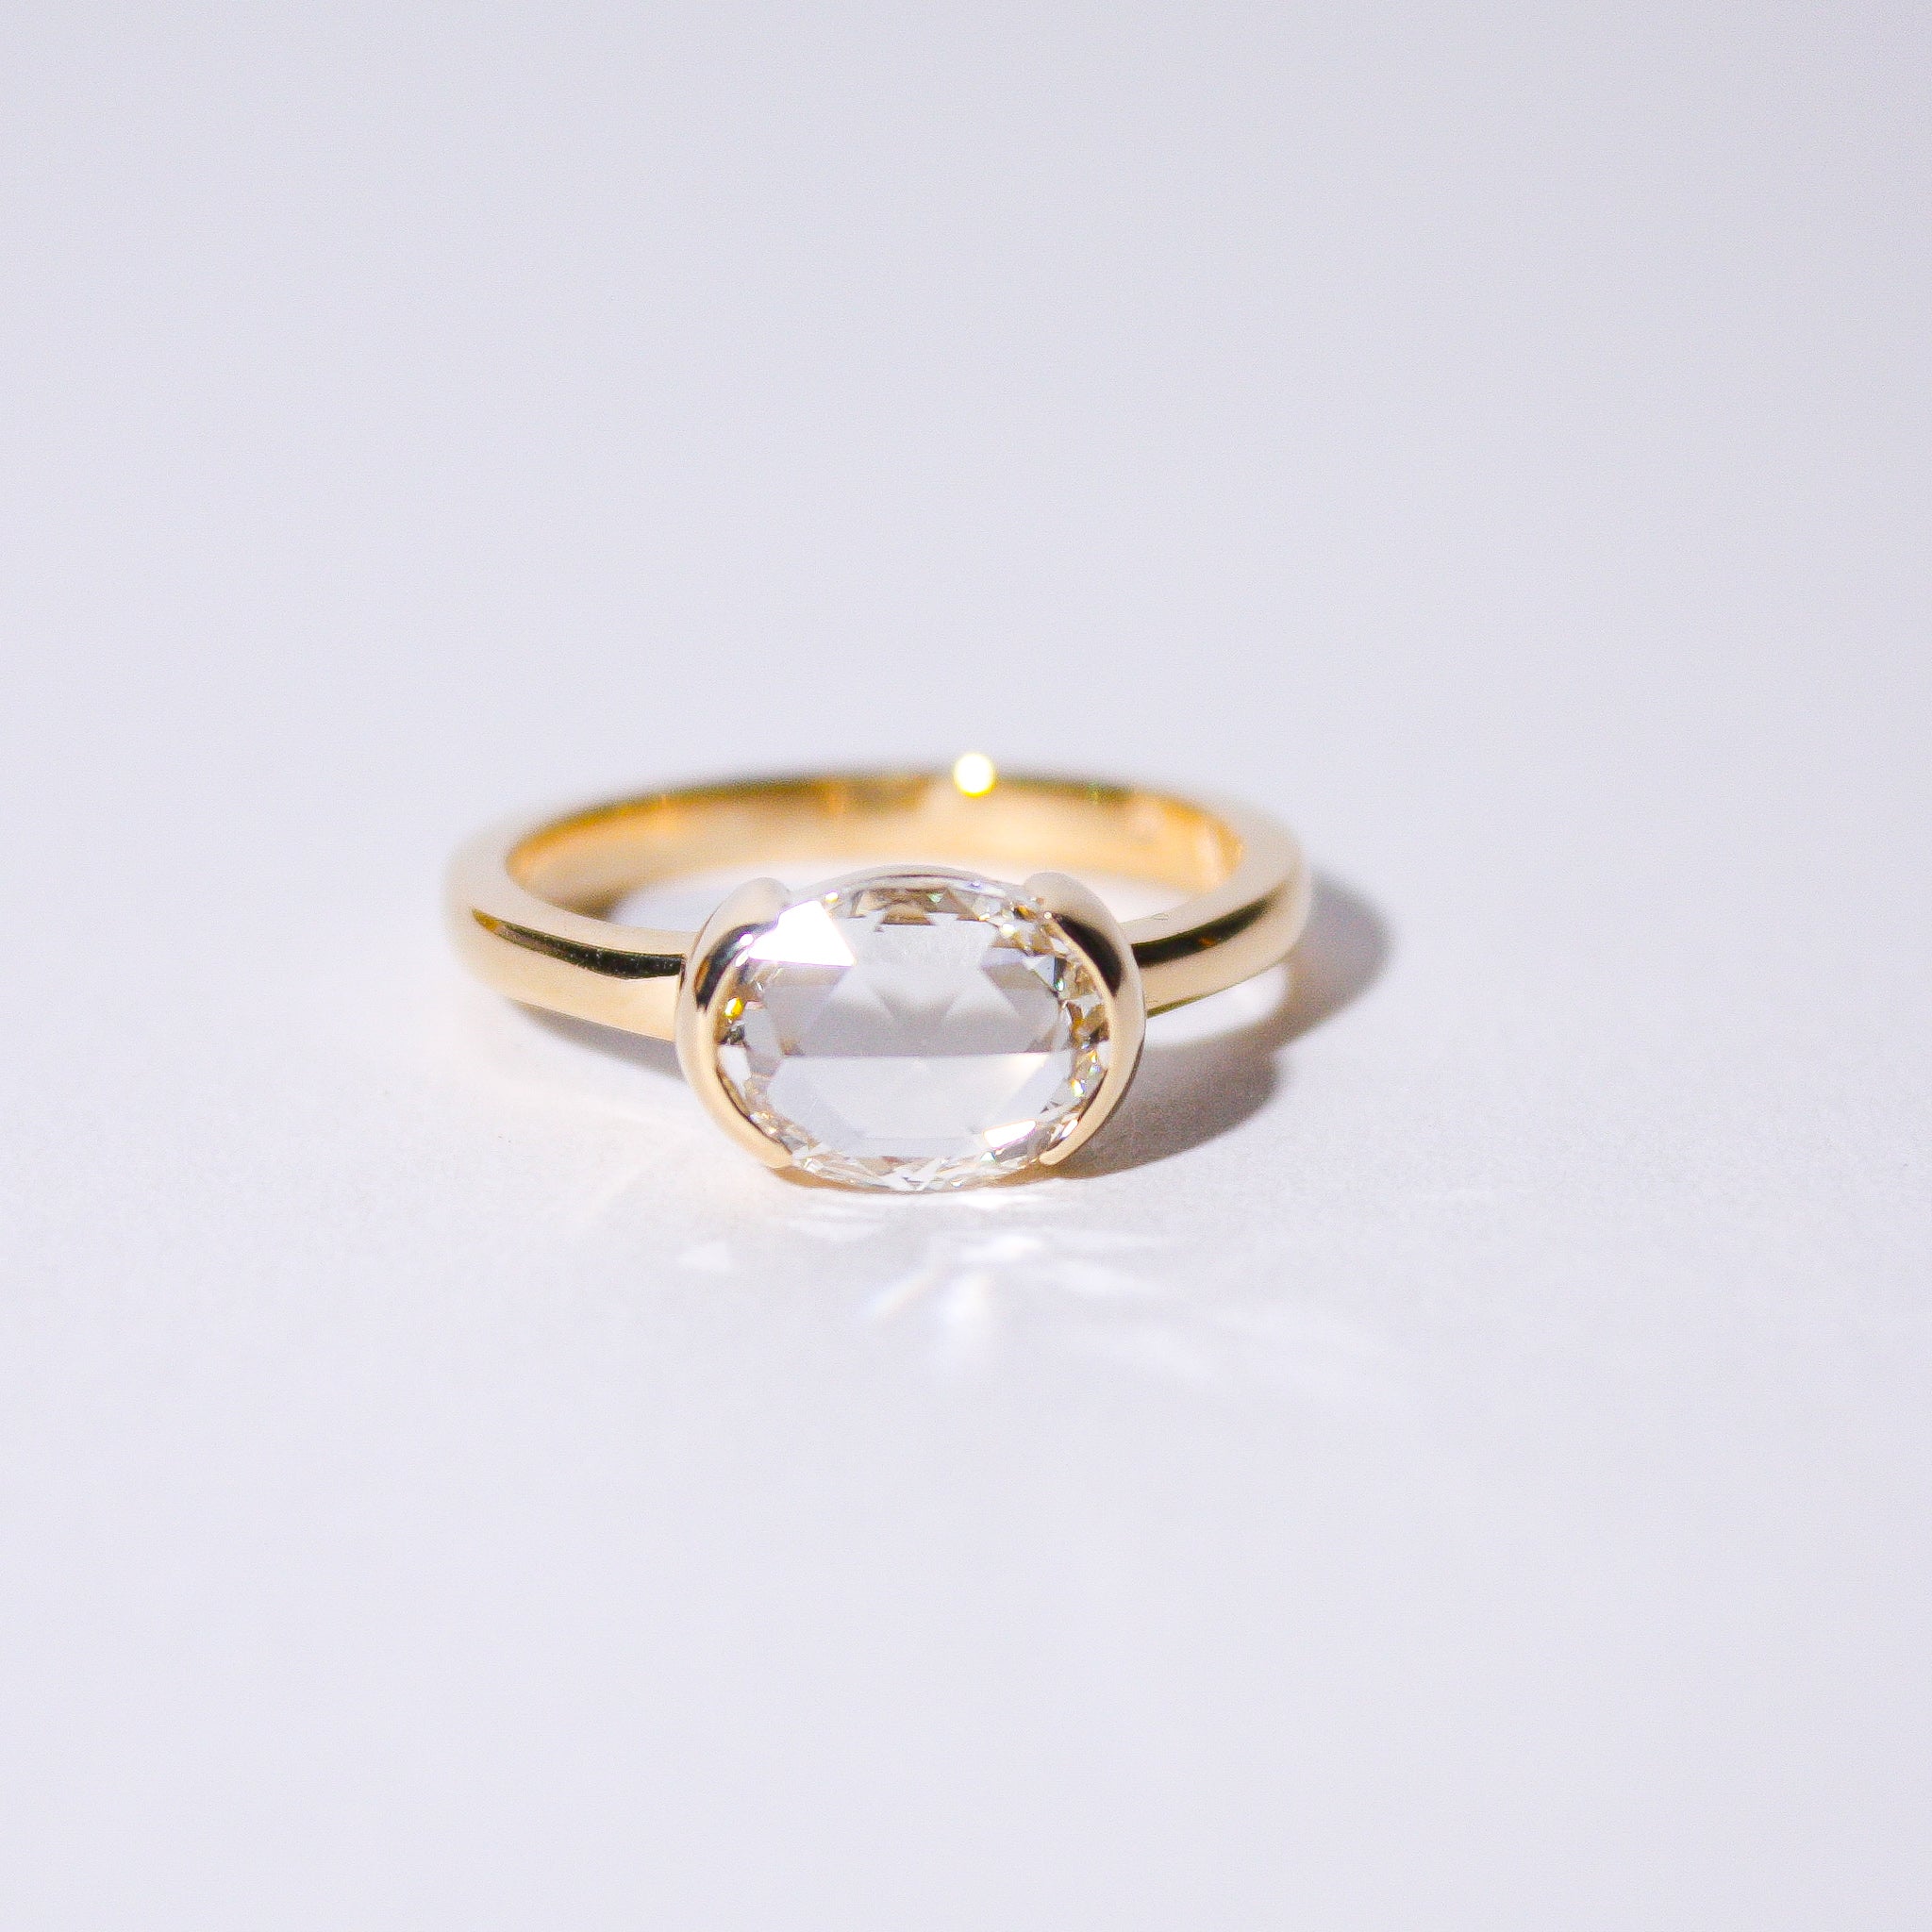 The Will O' The Wisp Ring in Natural Diamond – The North Way Studio